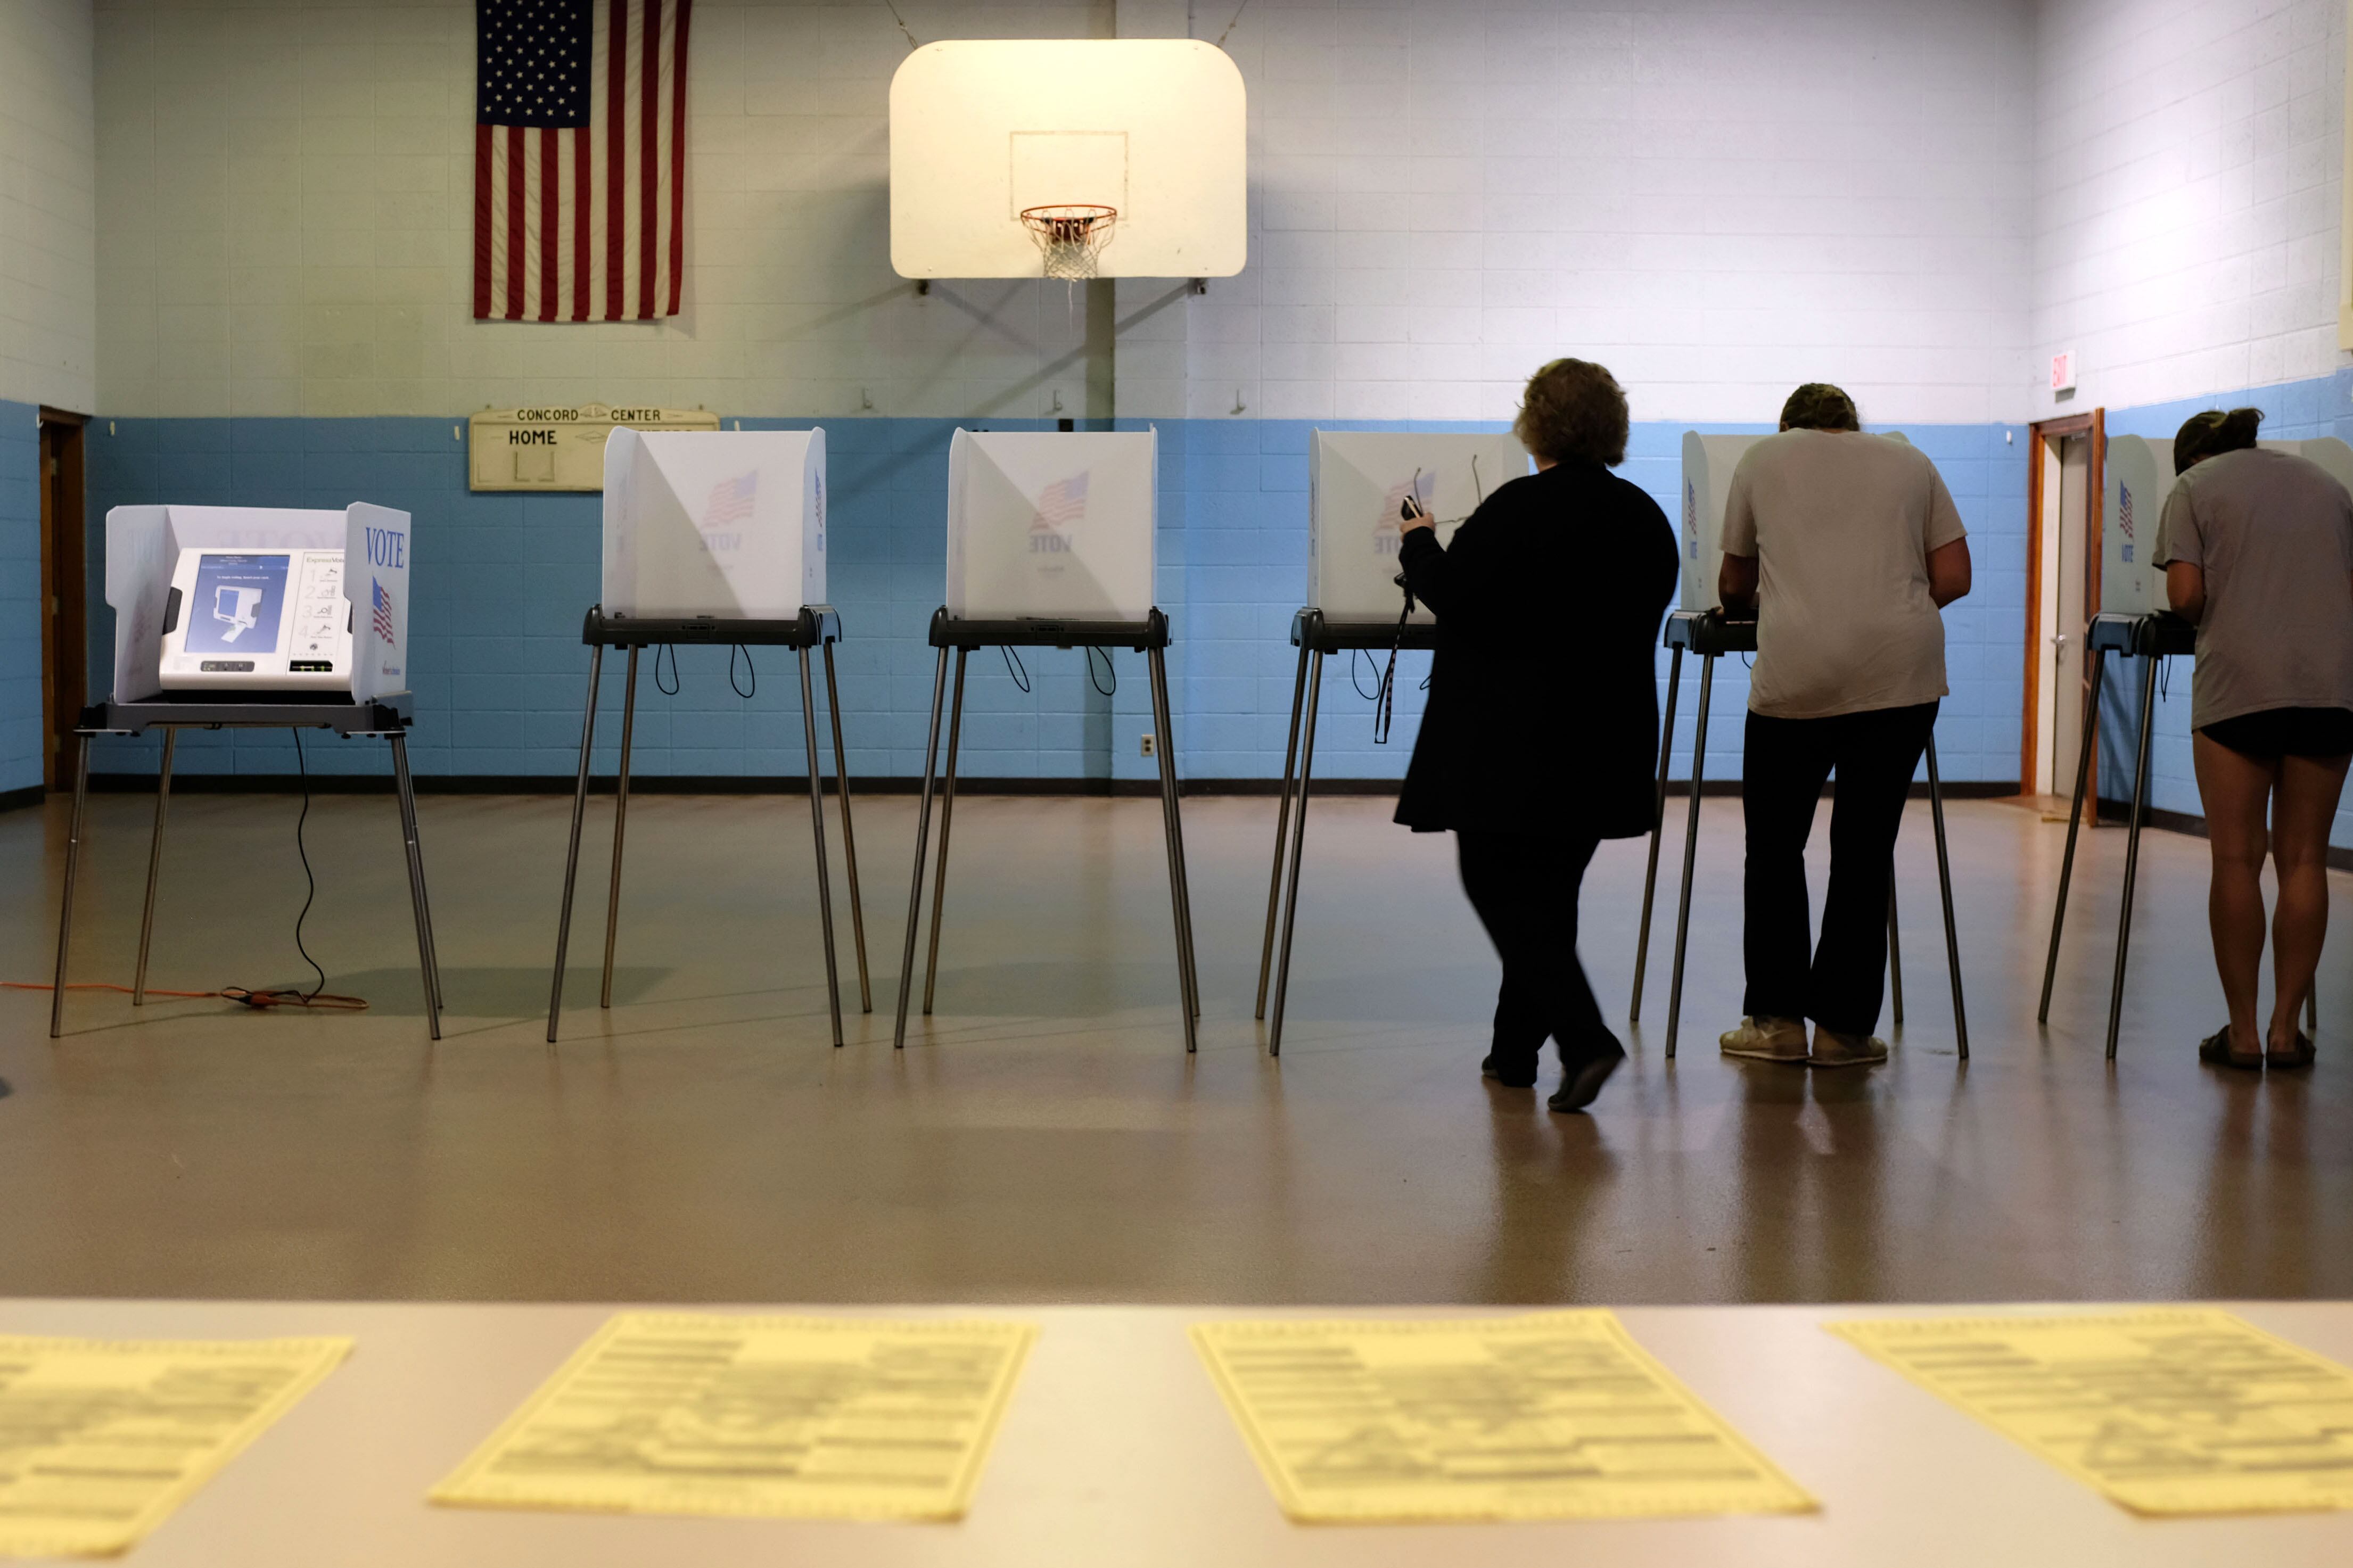 Three people stand at voting booths in a gym with a table full of yellow ballots in the foreground.